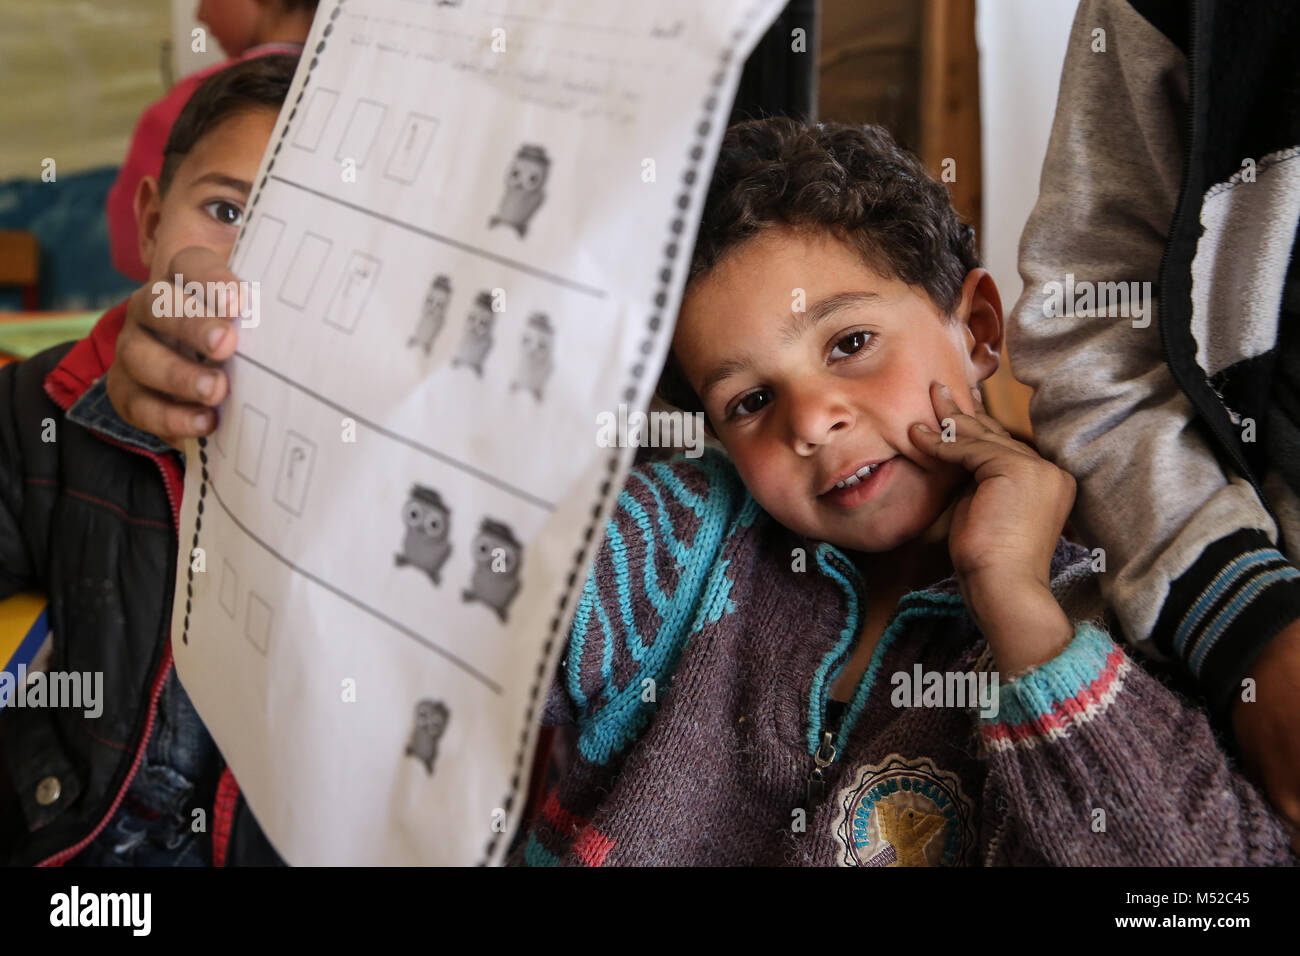 Syrian children show off their schoolwork in a refugee camp in Bekaa Valley. More than one million Syrians fled to Lebanon after the Syrian war began in 2011. Stock Photo